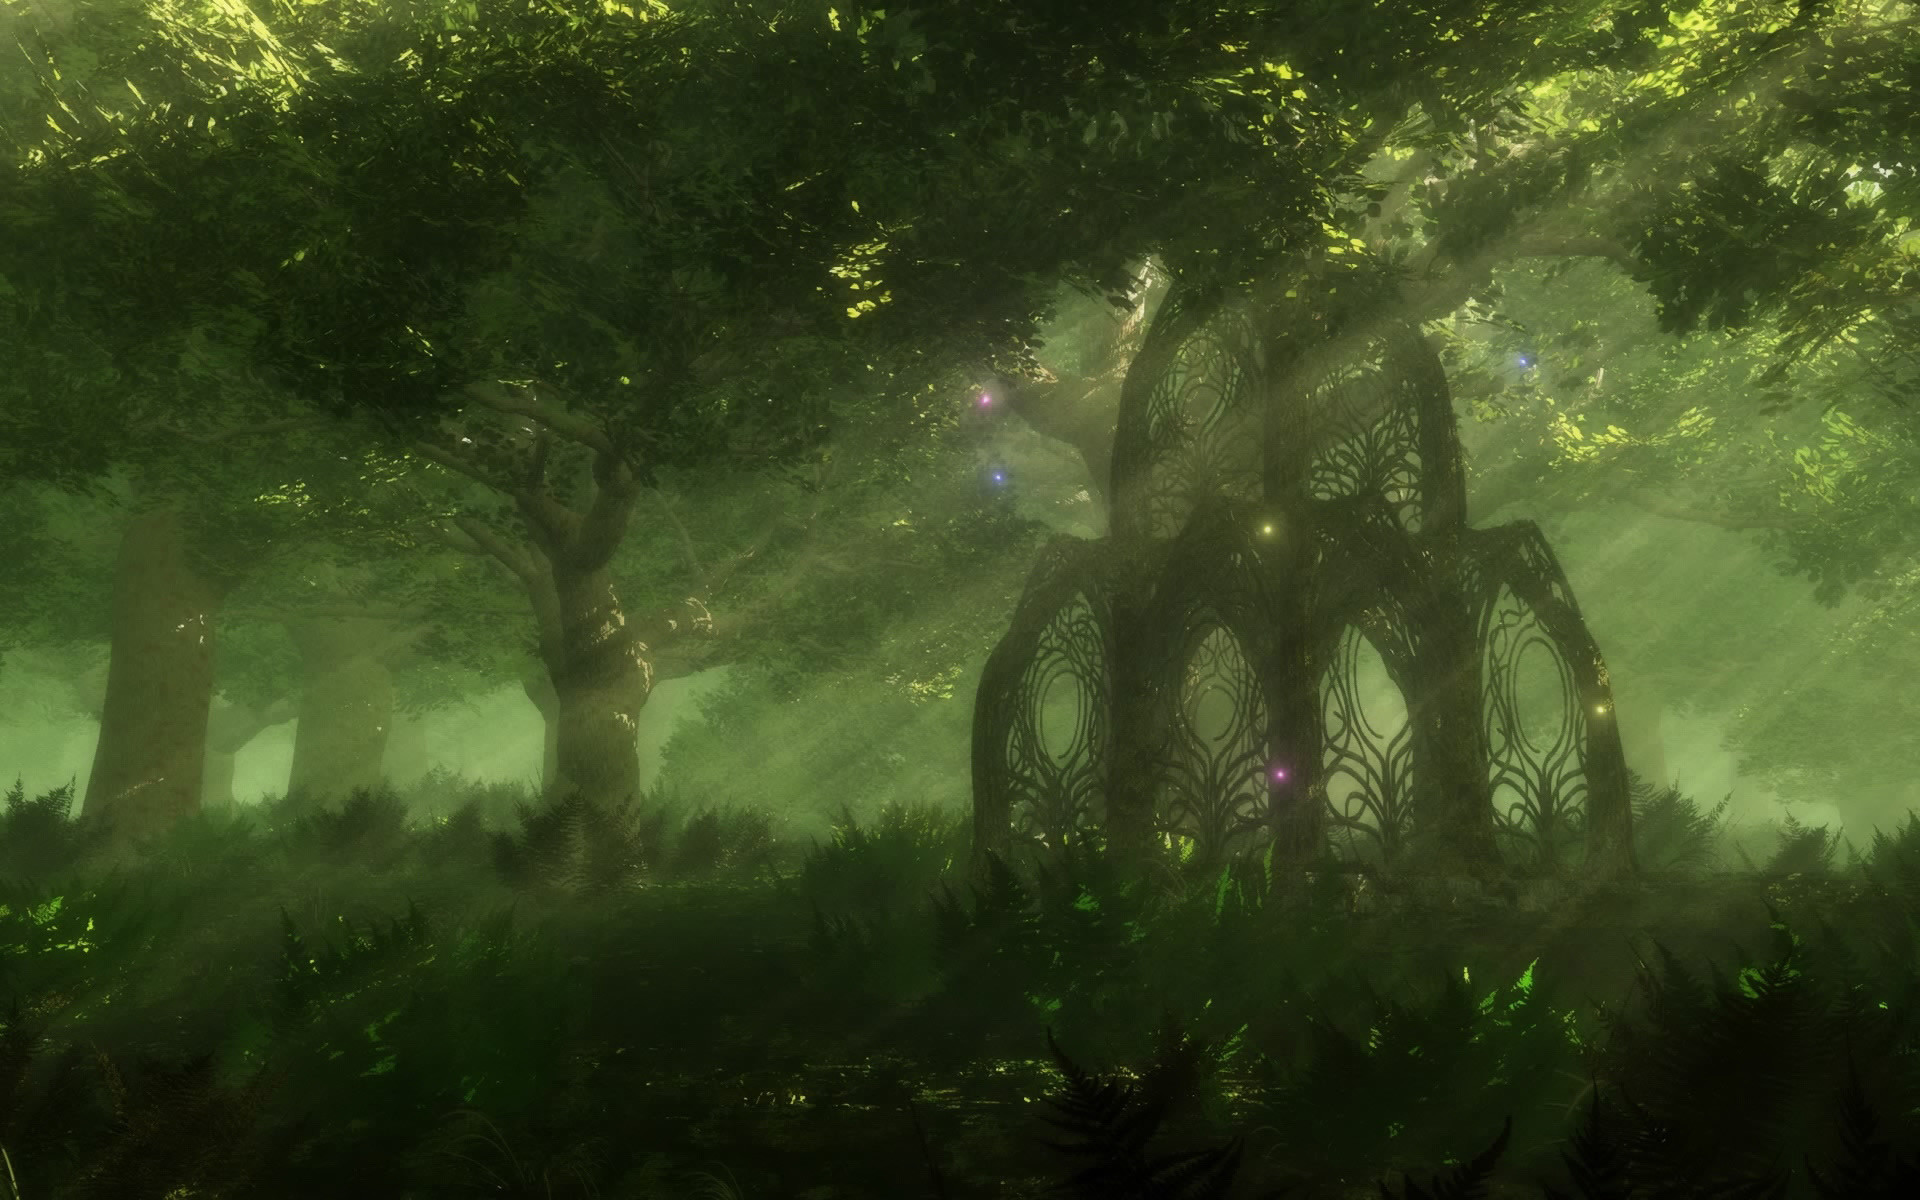 1920x1200 .com/anime/abstract/part 3/fantasy forest hd .